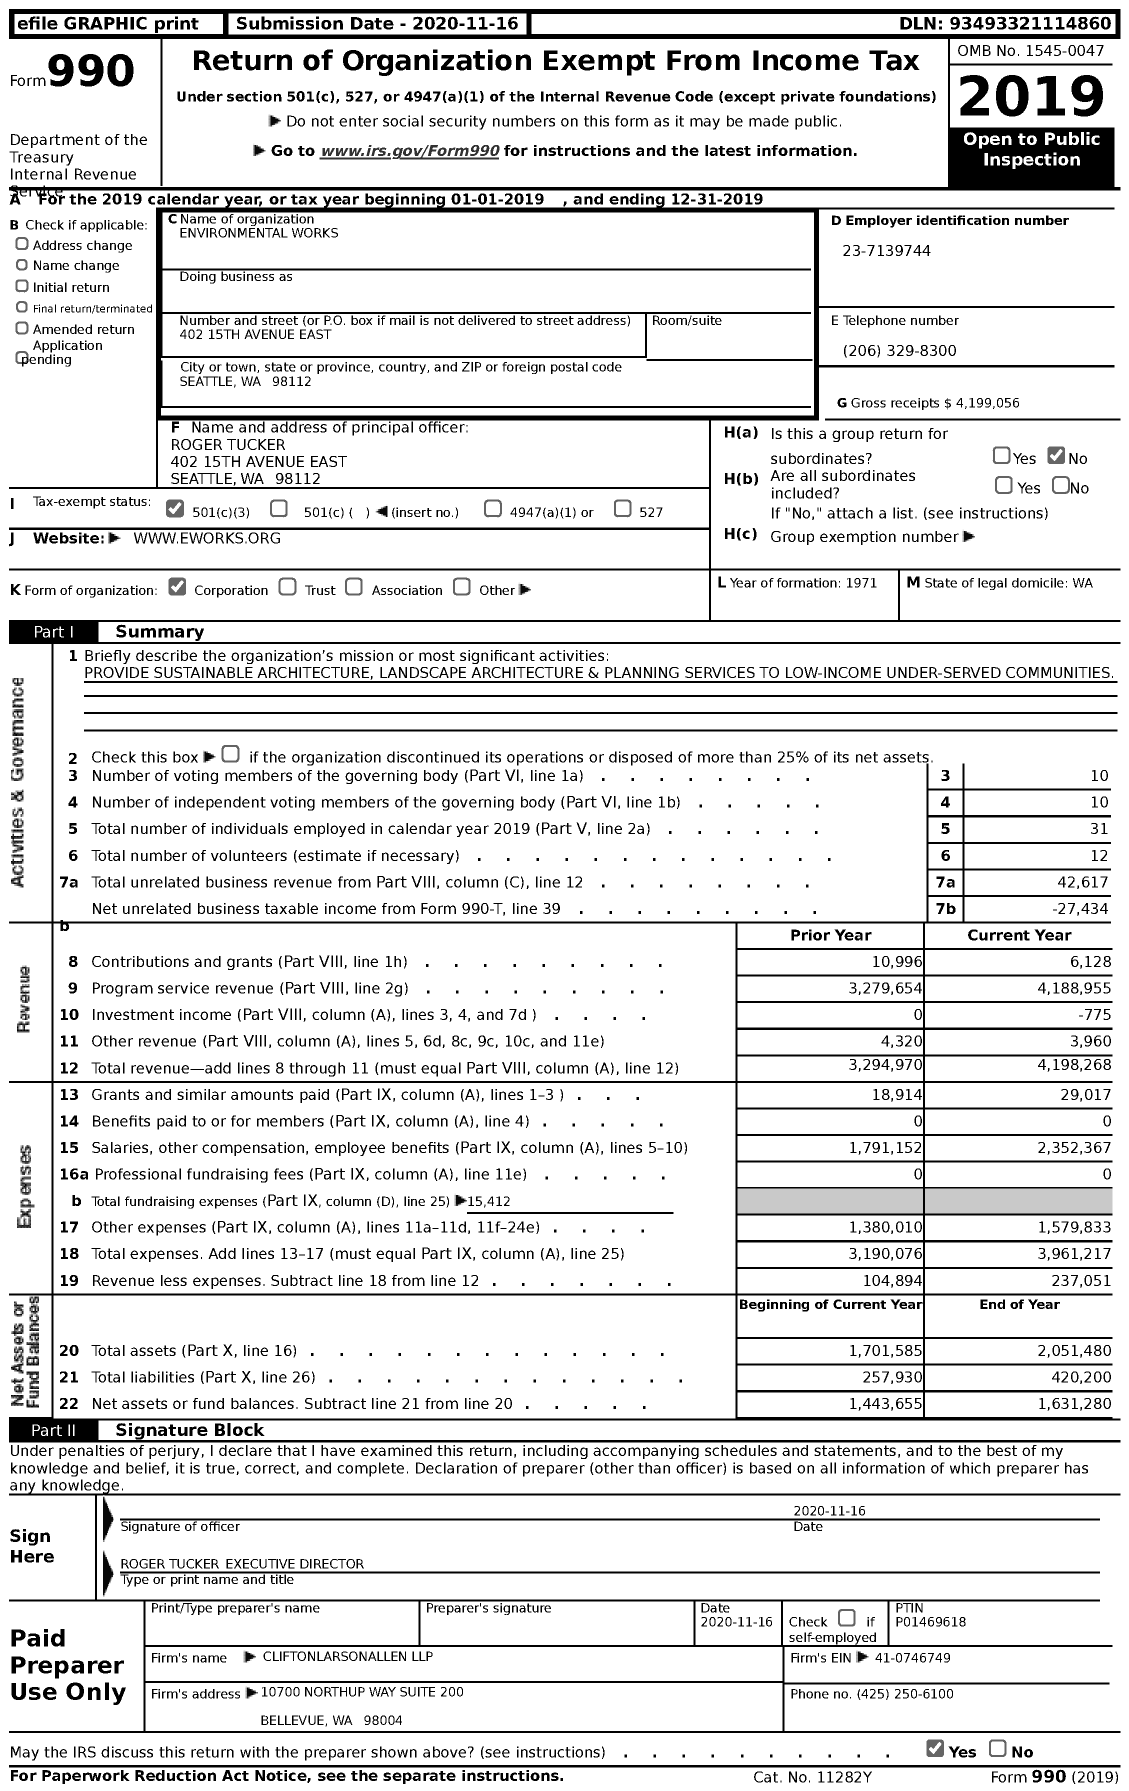 Image of first page of 2019 Form 990 for environmental WORKS (EW)